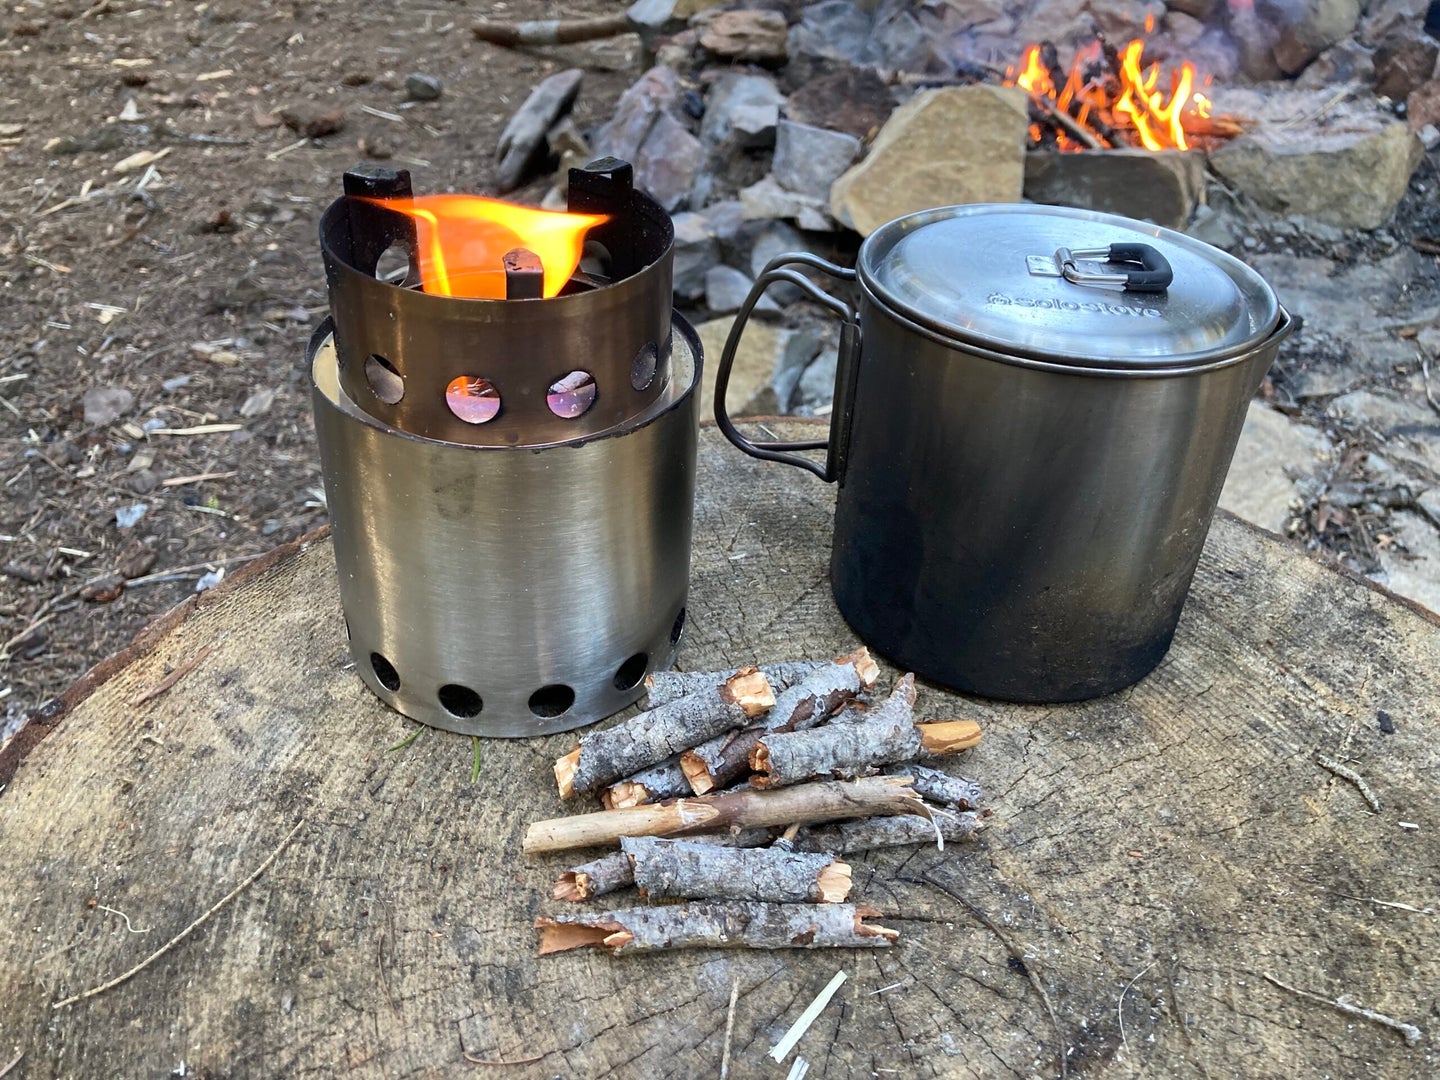 Solo Stove Lite Review: We Tested the Smokeless Camp Stove